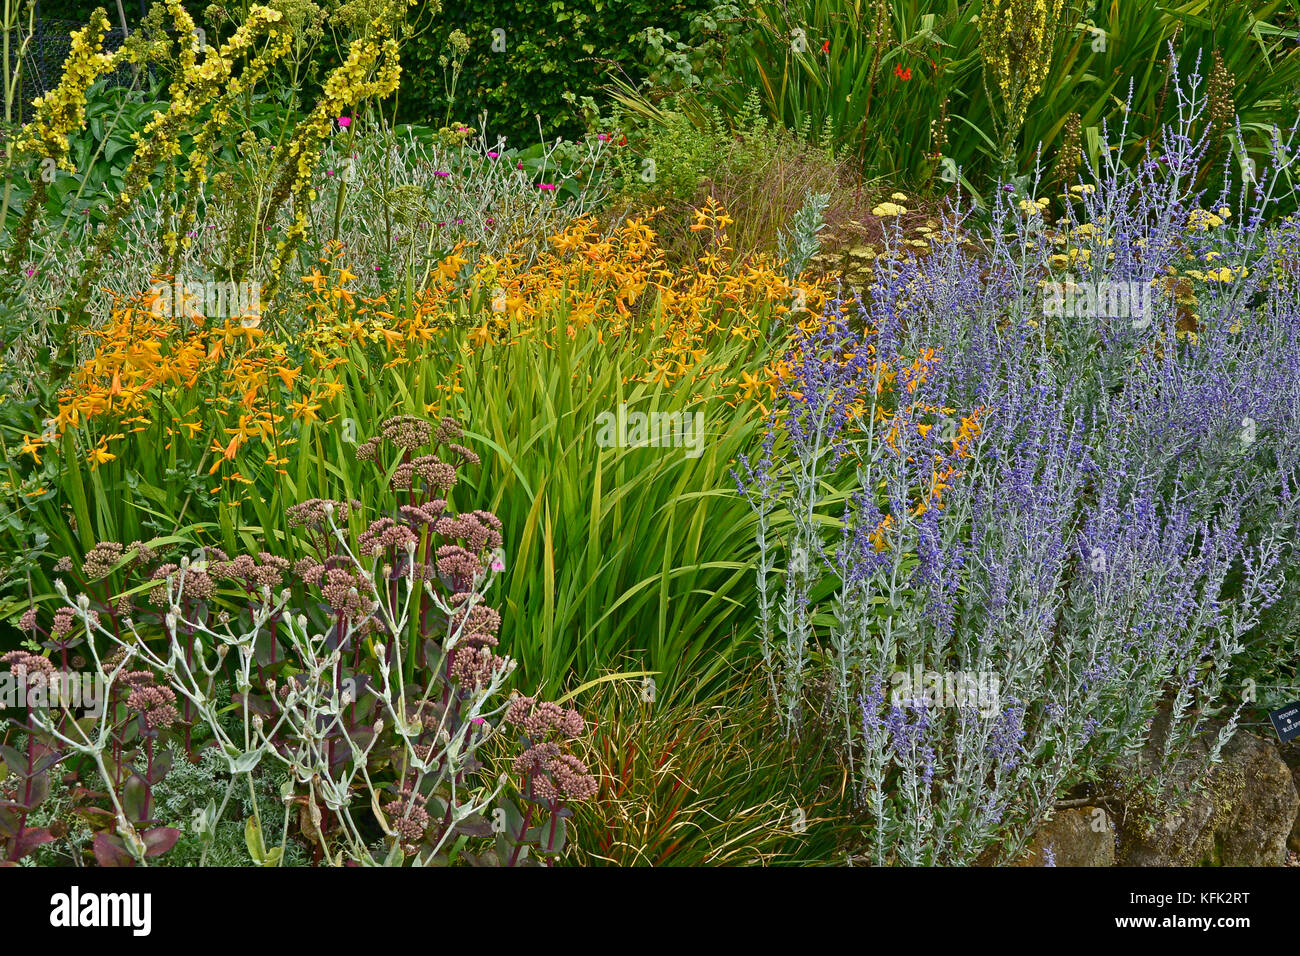 Garden flower border with Perovskia, Crocosmia and Verbascum making a colourful display in late summer Stock Photo